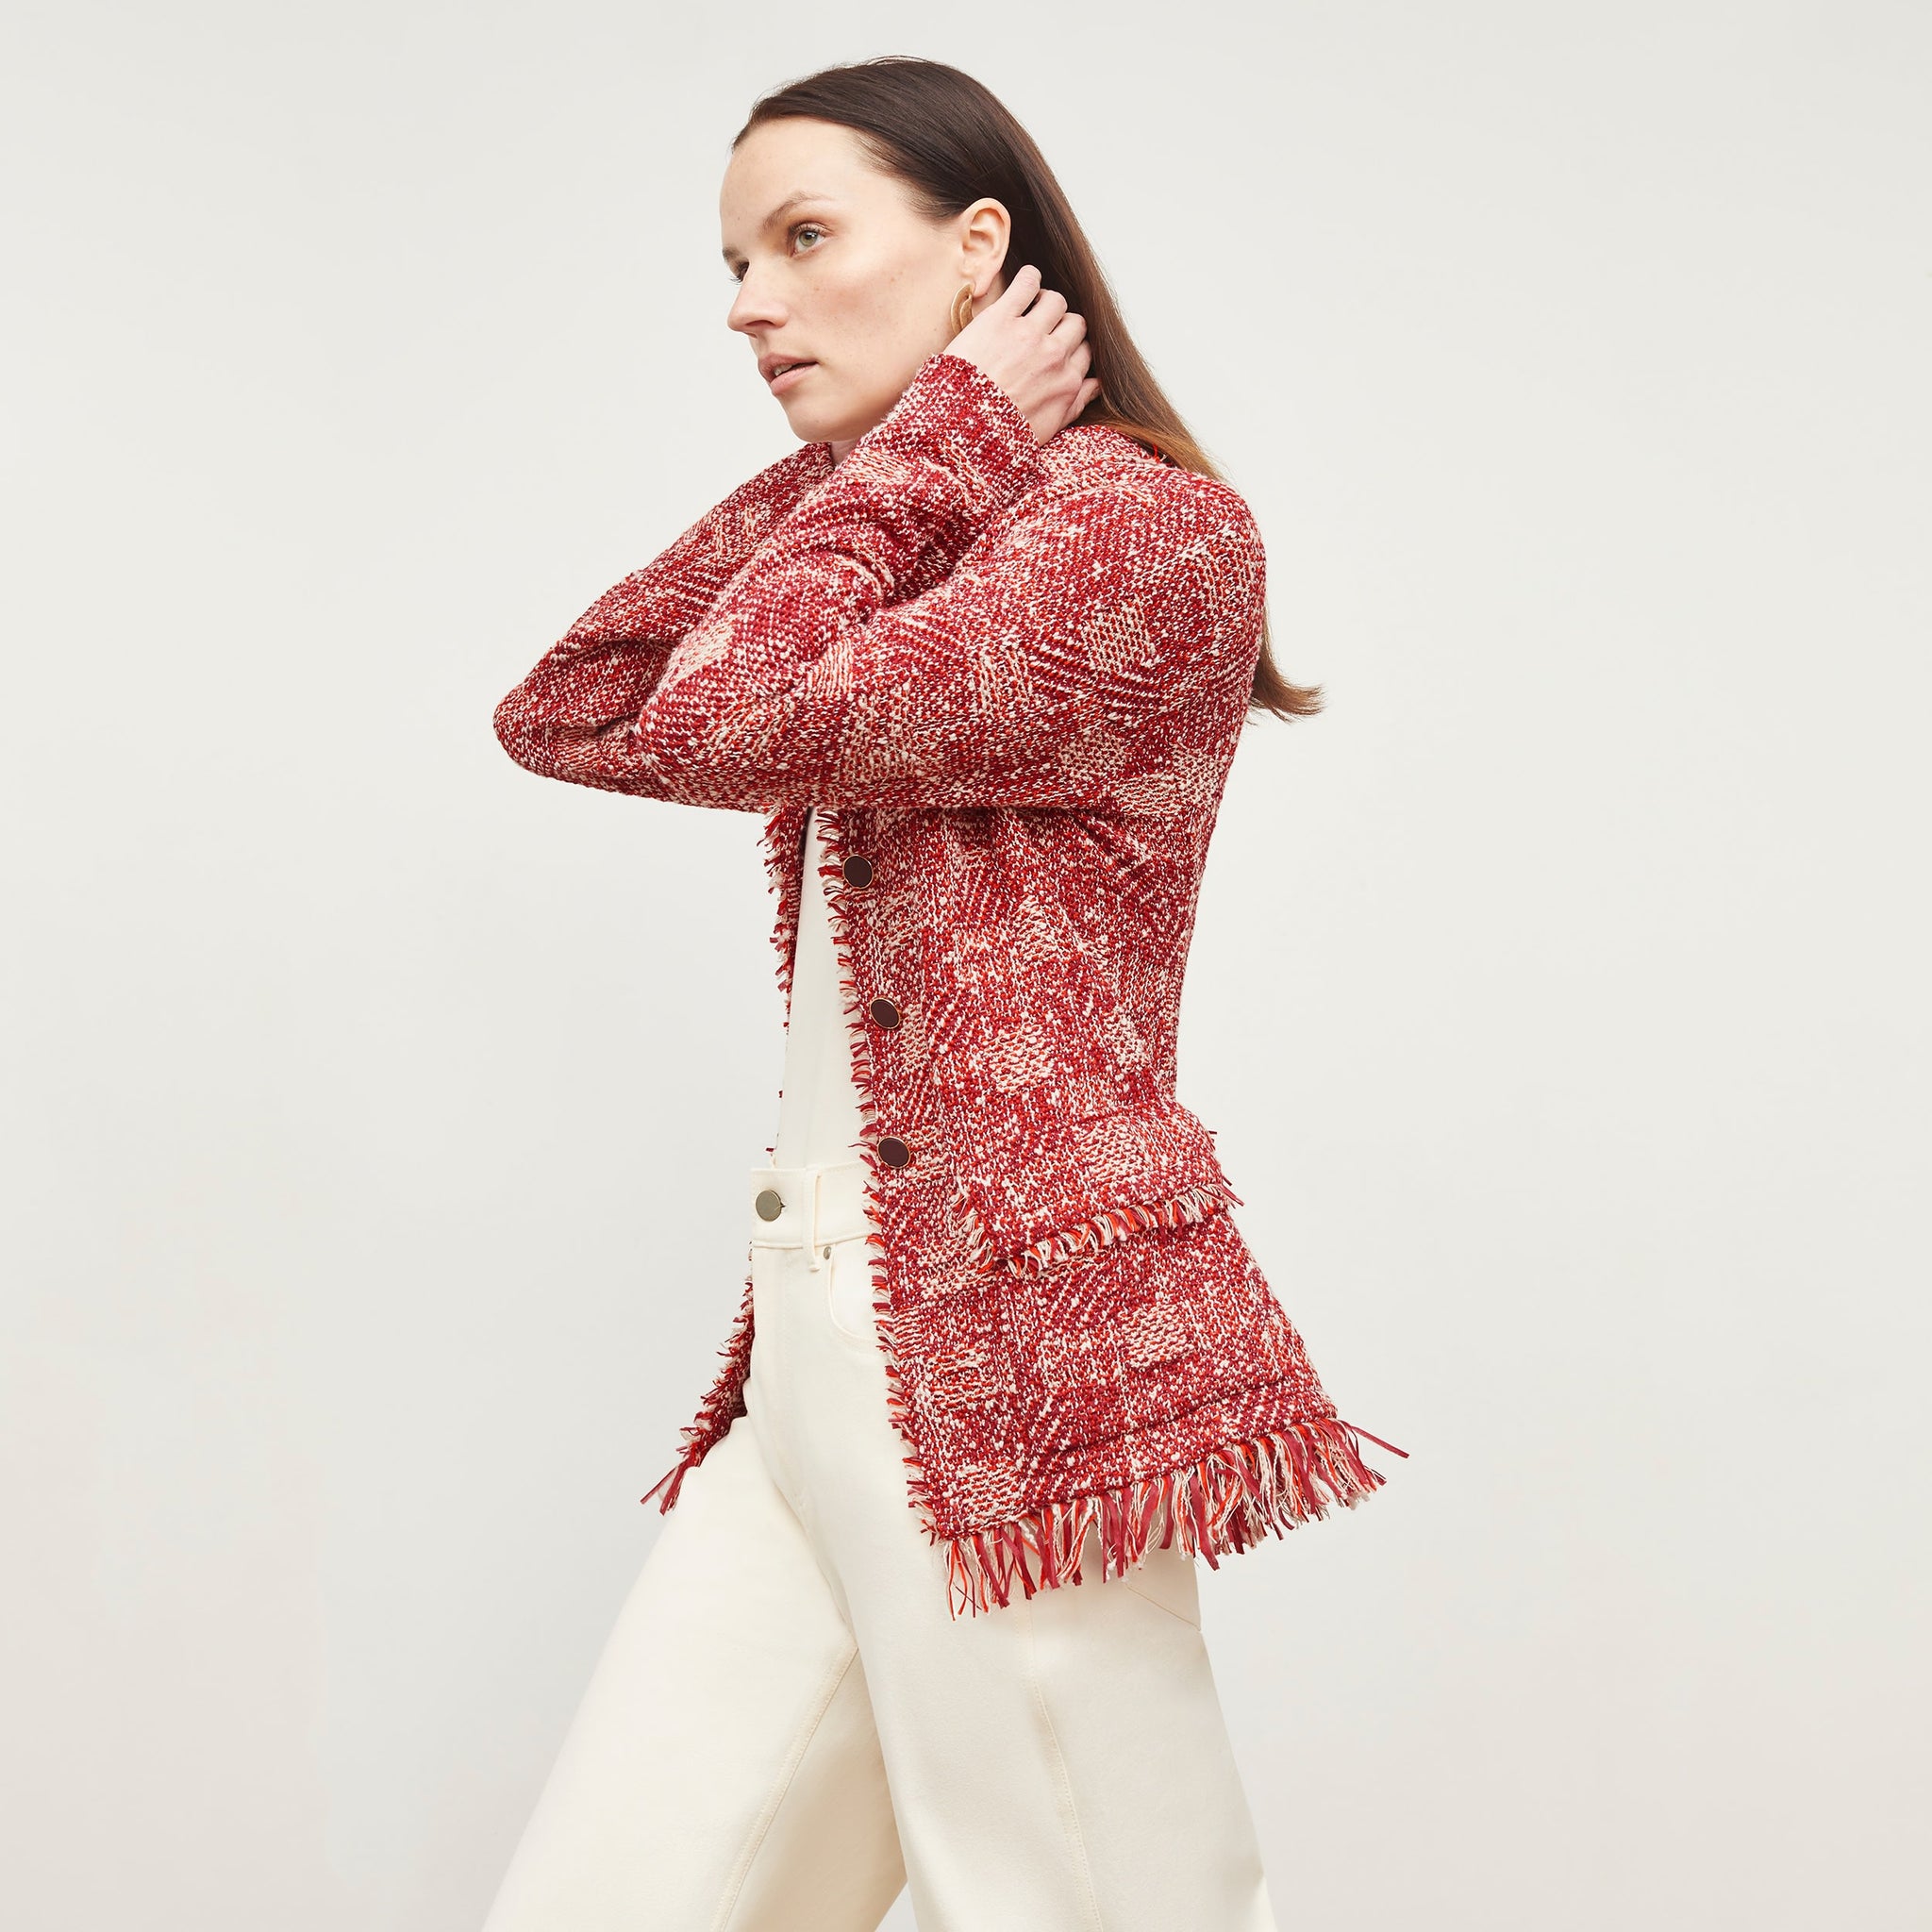 Side image of a woman standing wearing the Porter Jacket—Interweave in Red Multi